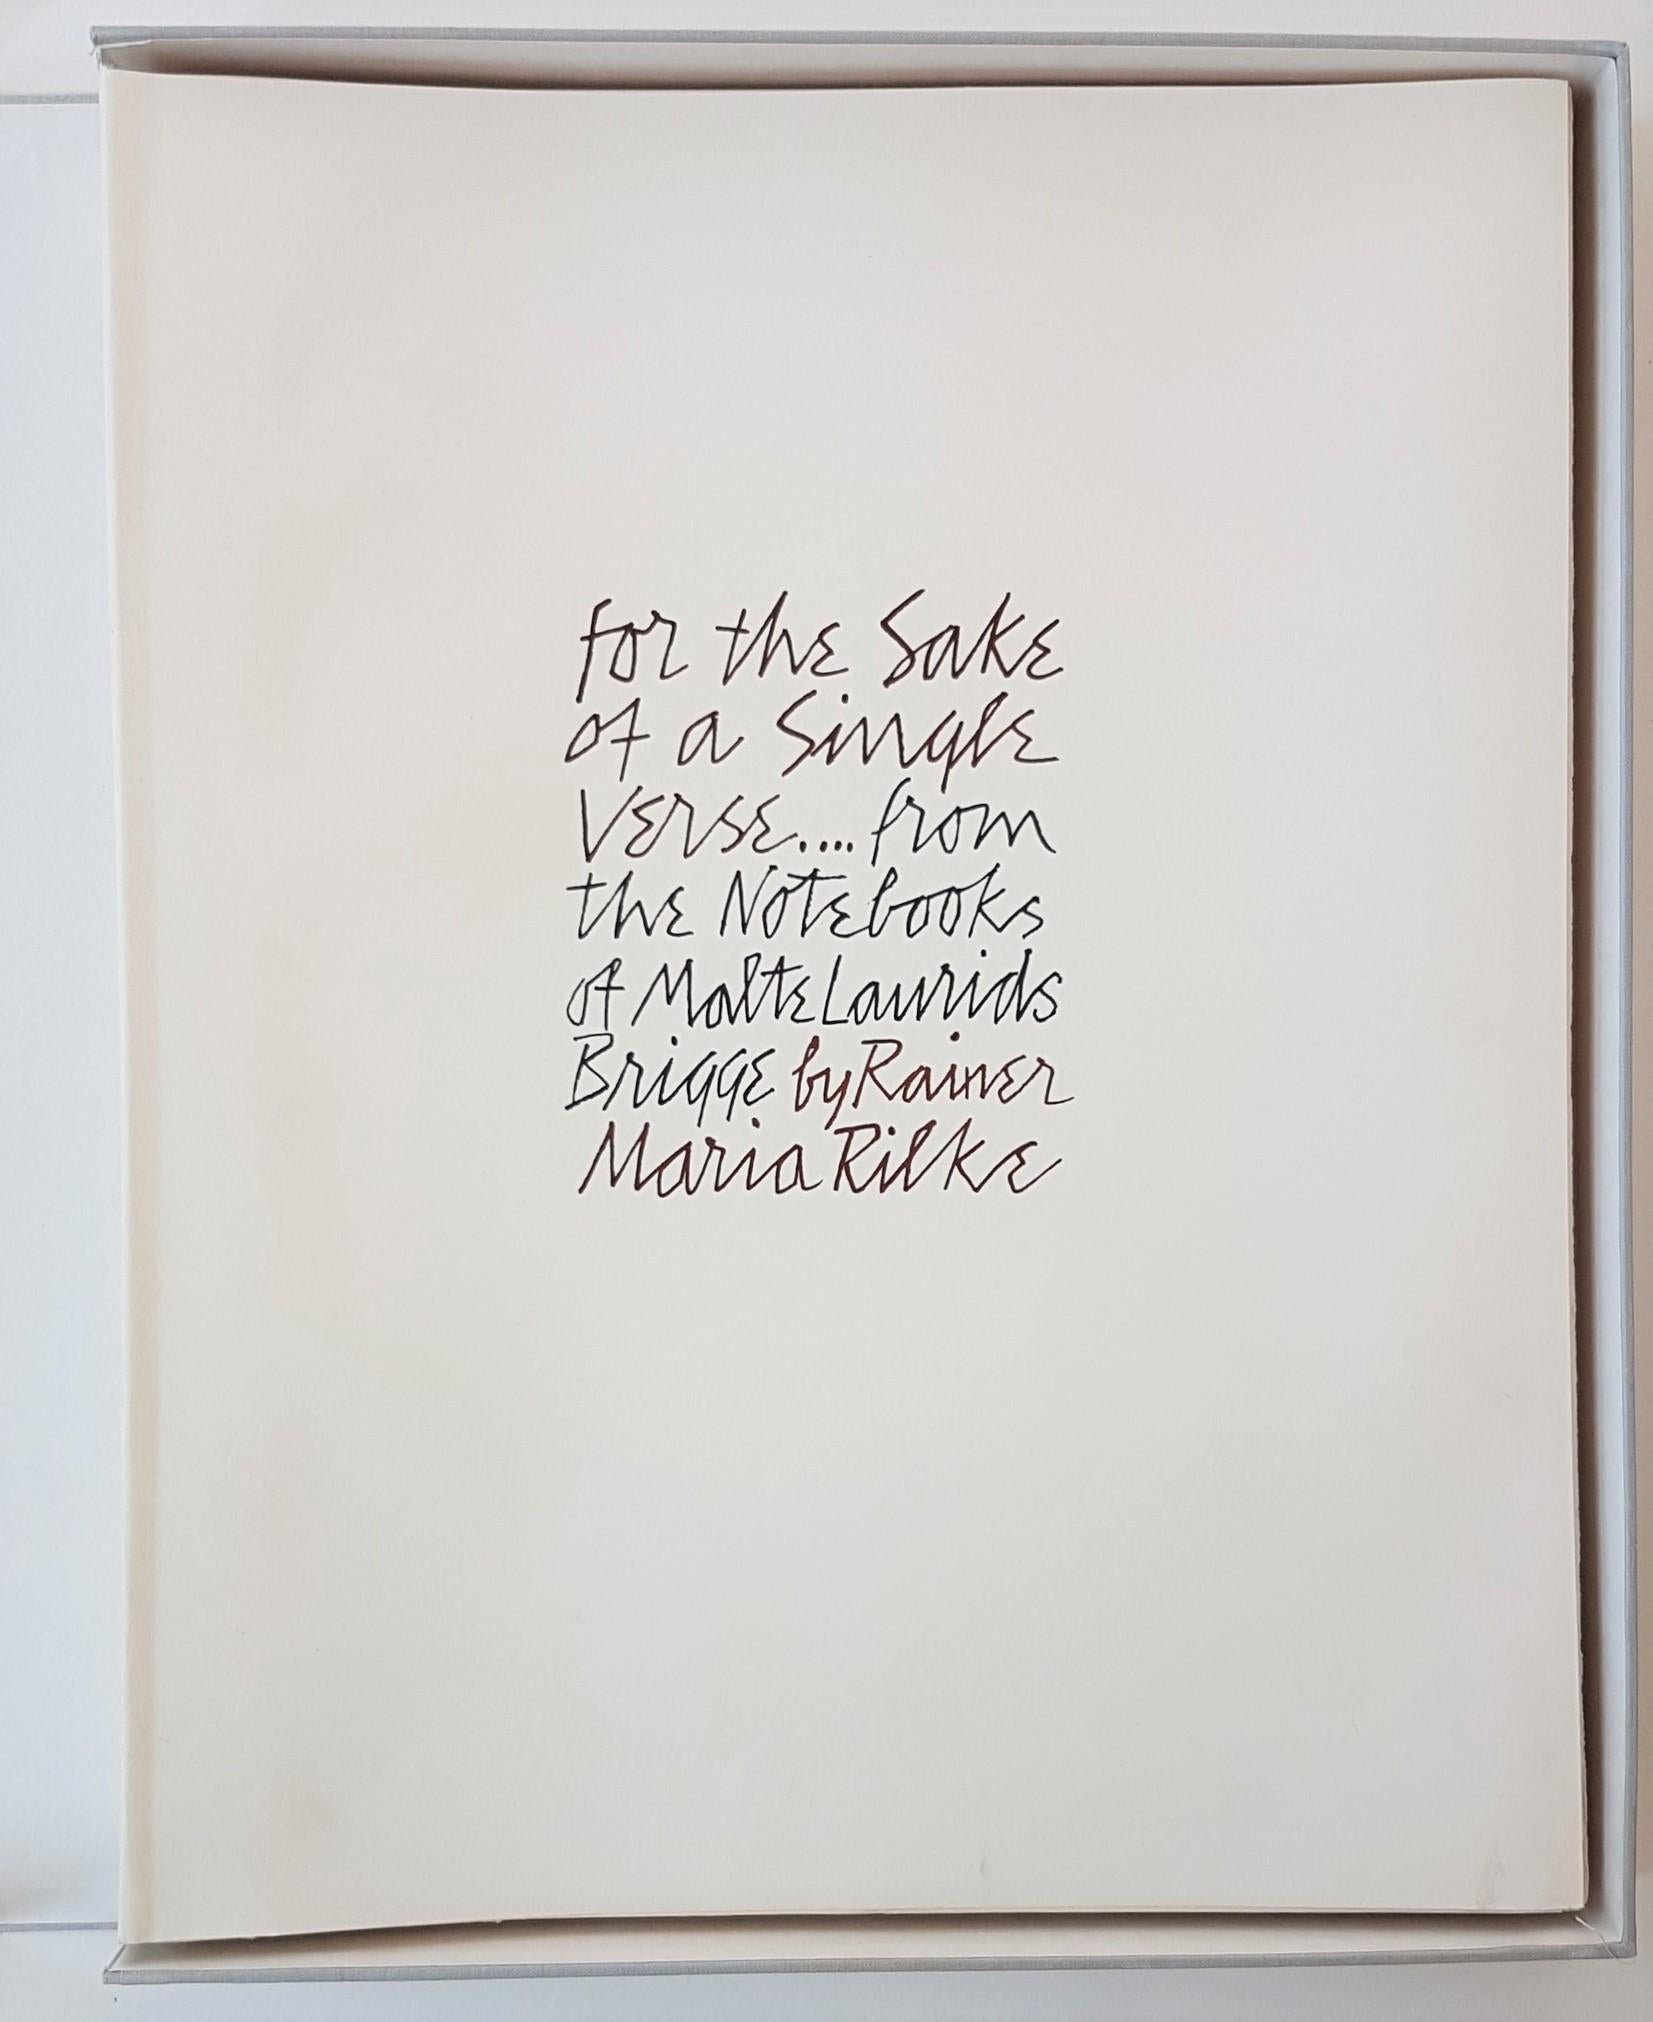 For the Sake of A Single Verse by Rainer Maria Rilke - Gray Figurative Print by Ben Shahn